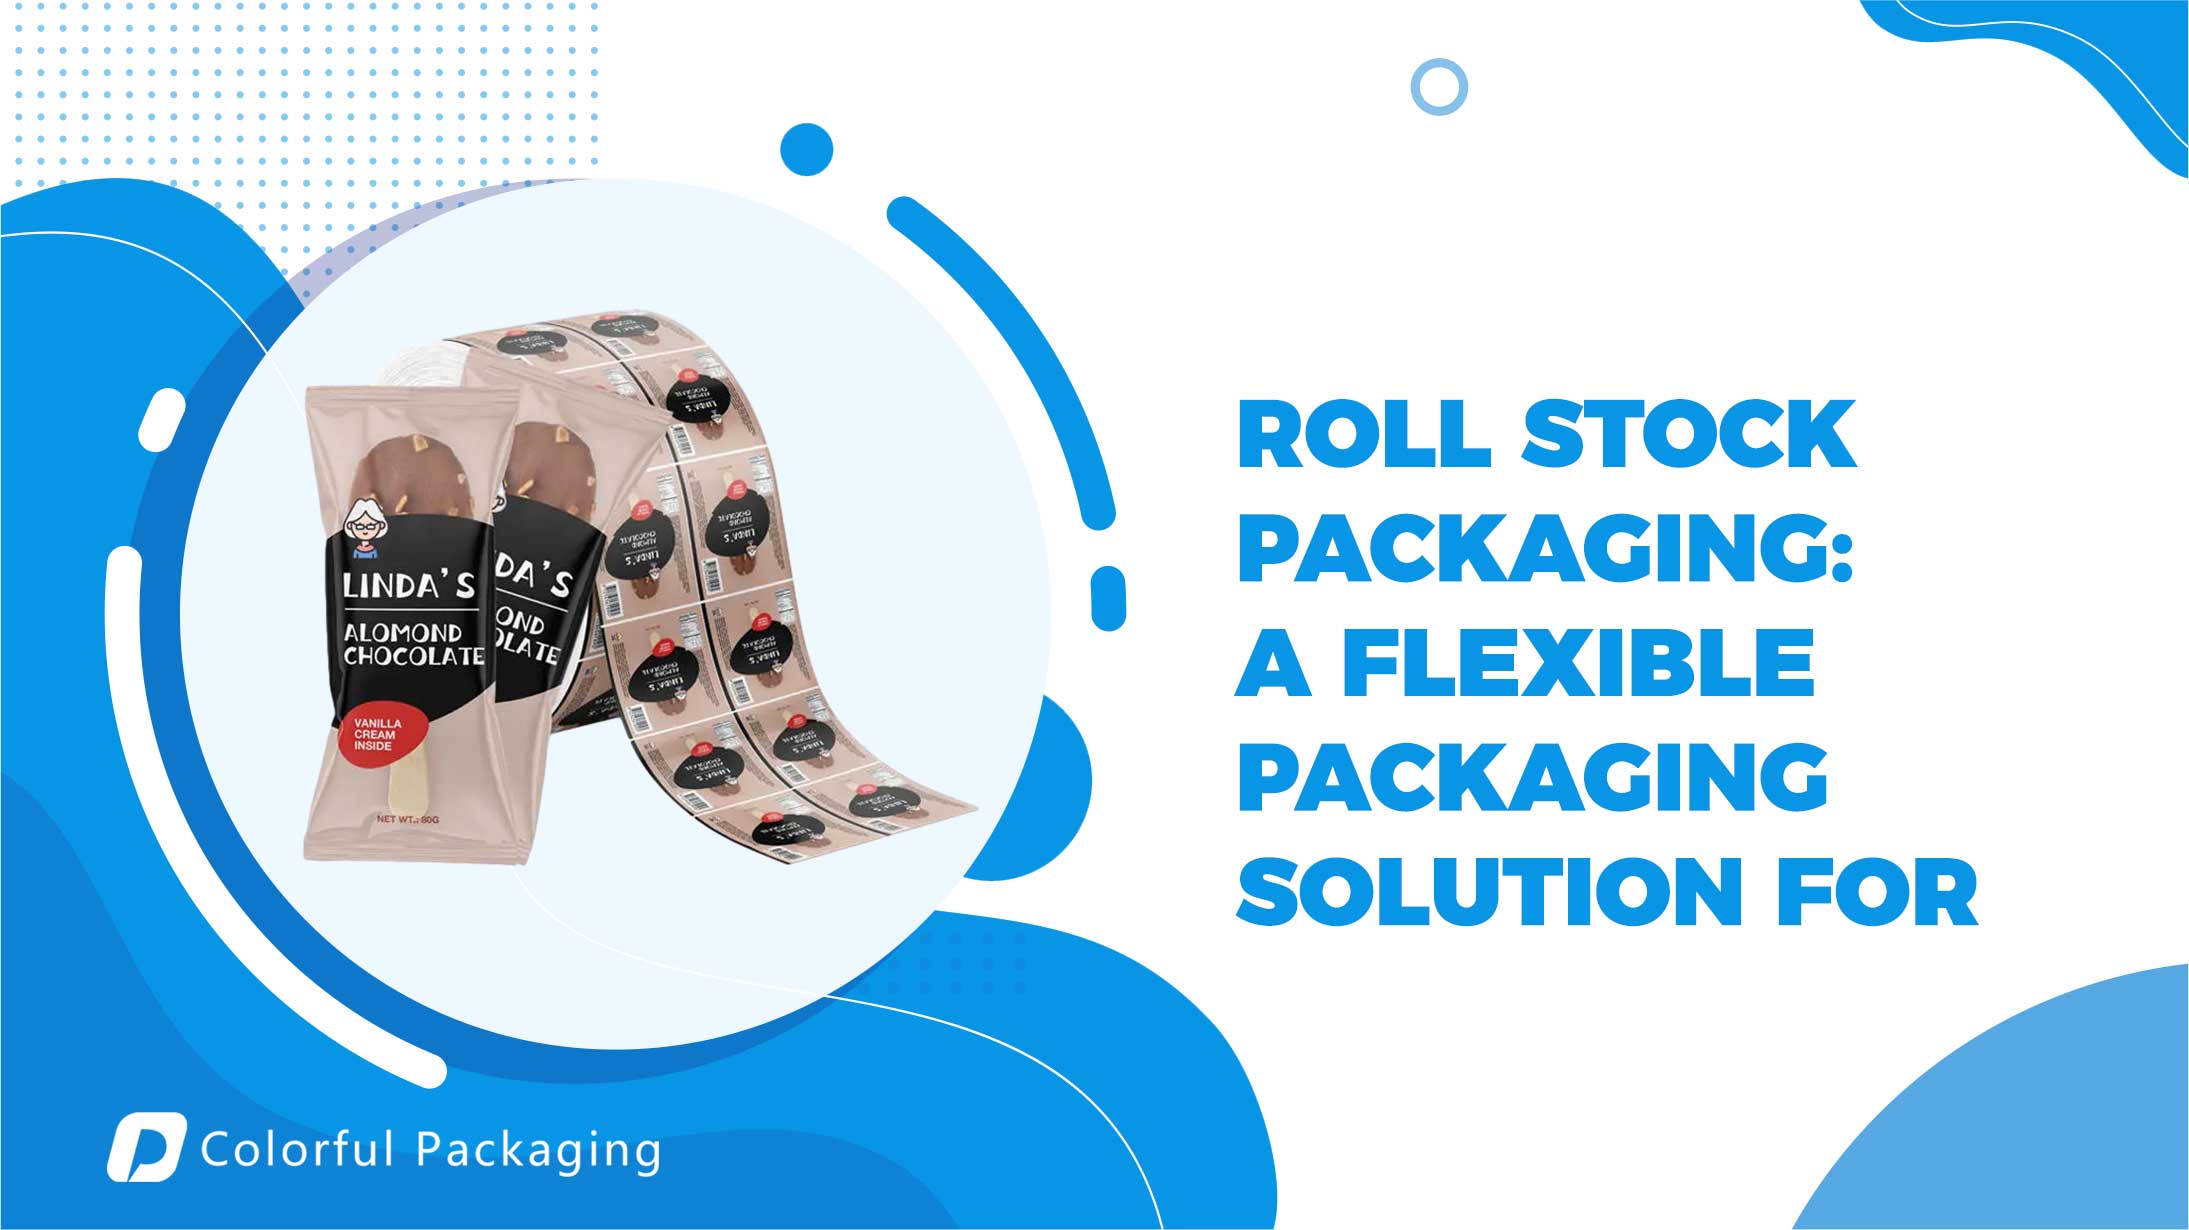 Roll stock packaging: A flexible packaging solution for every business.